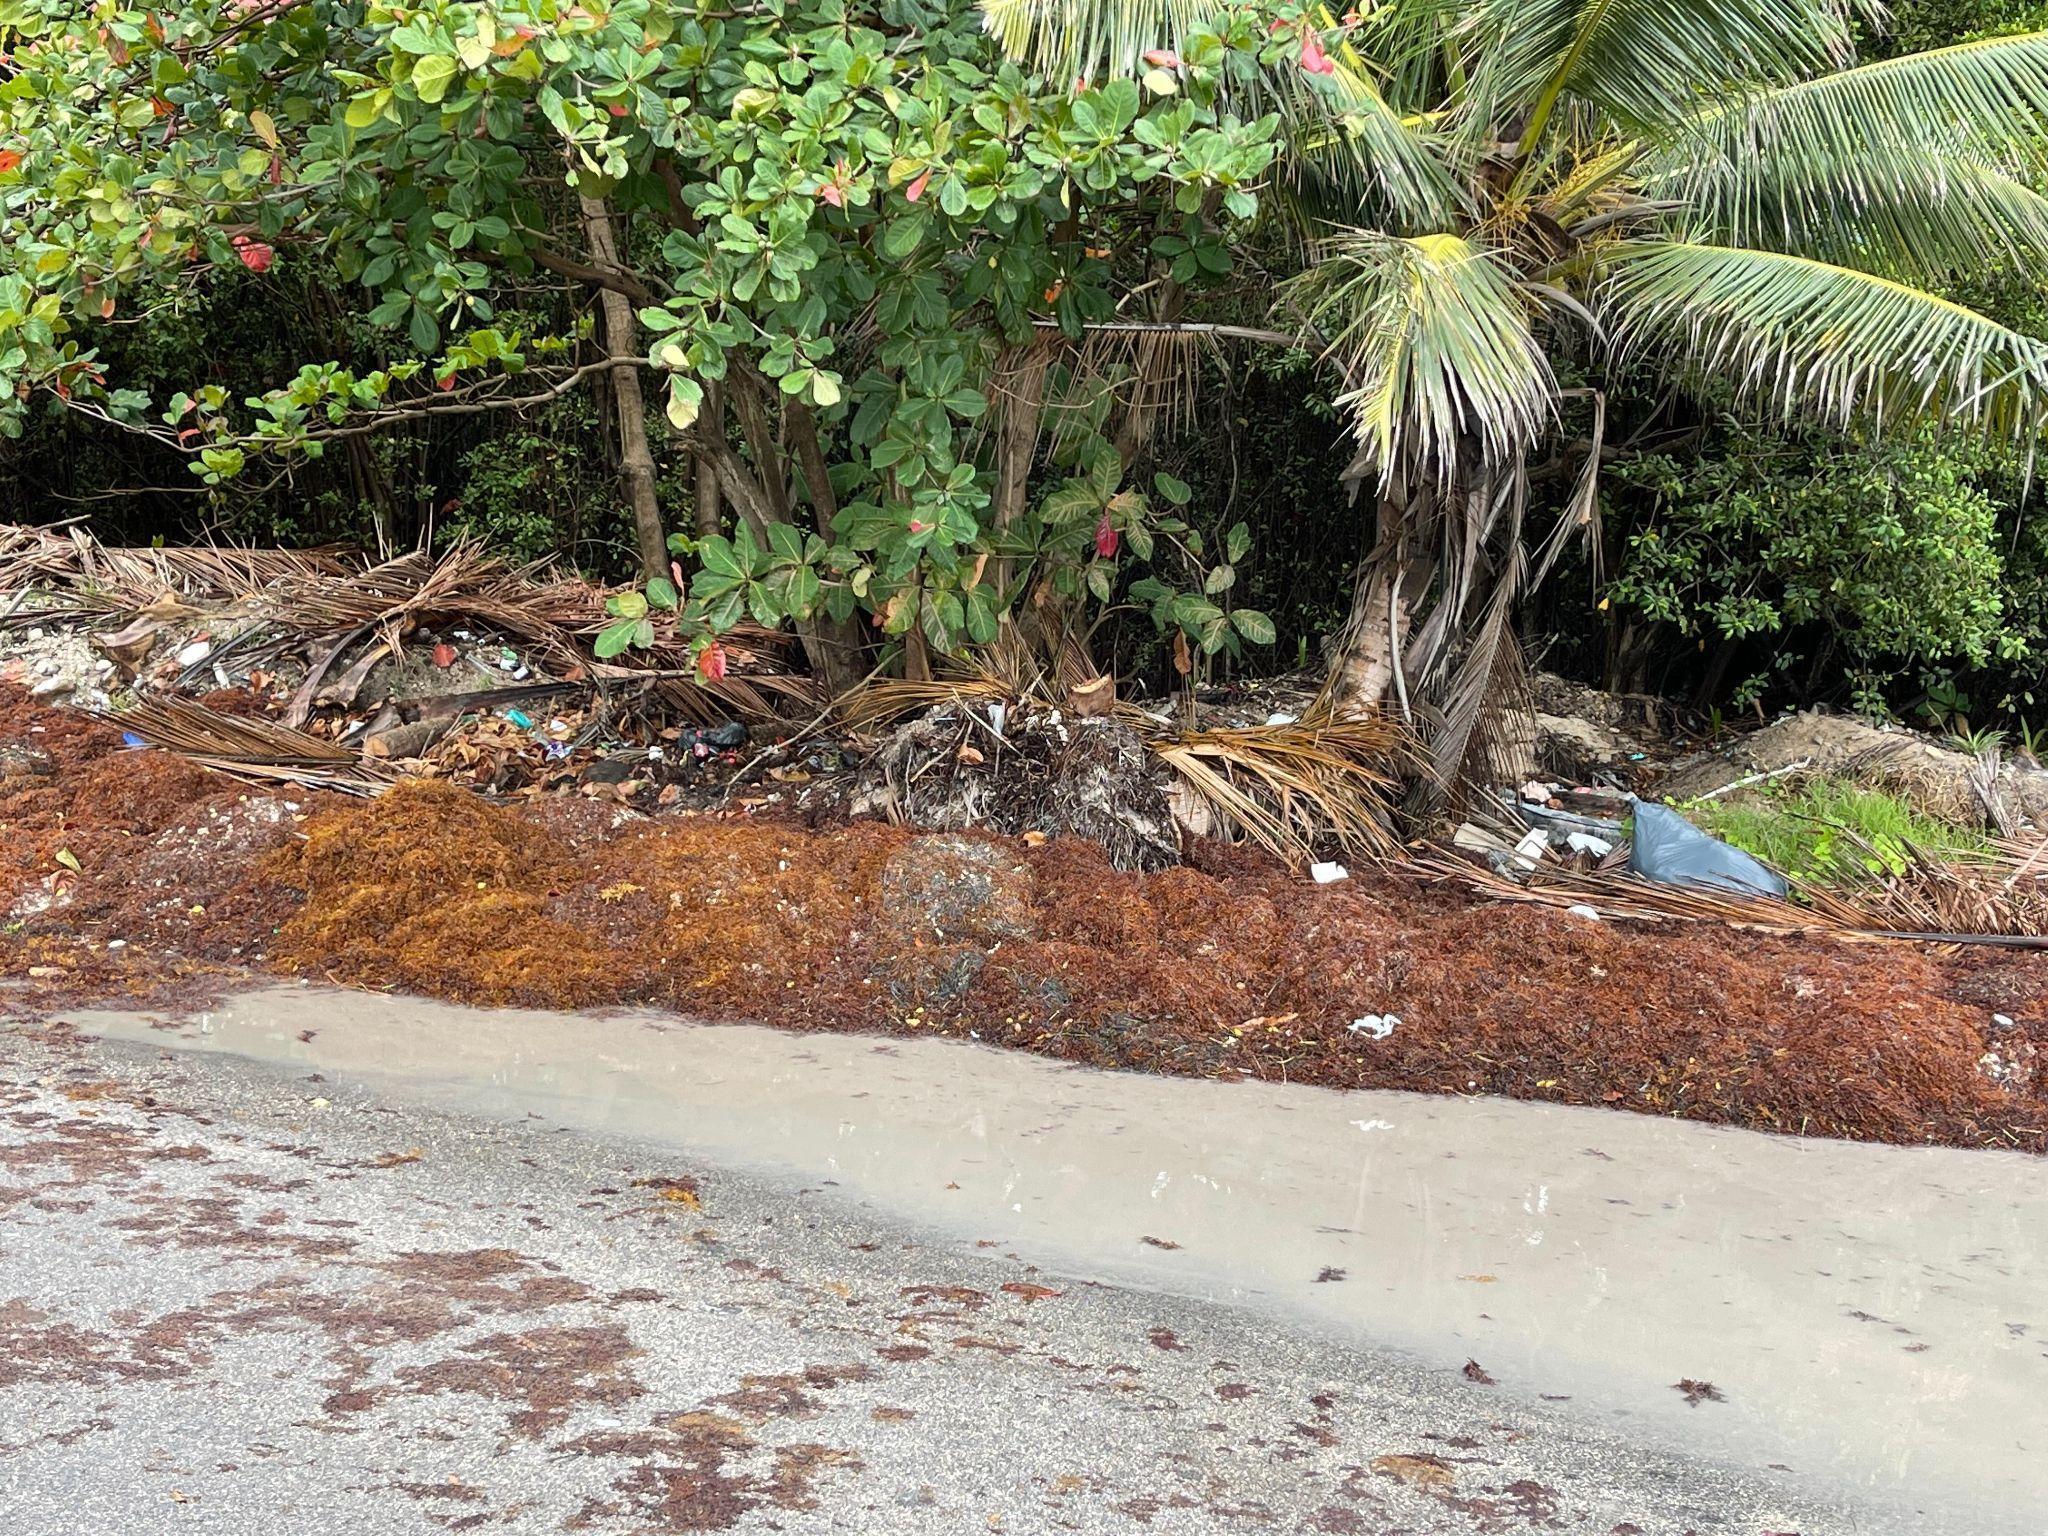 Sargassum removed on beach rotting along a road